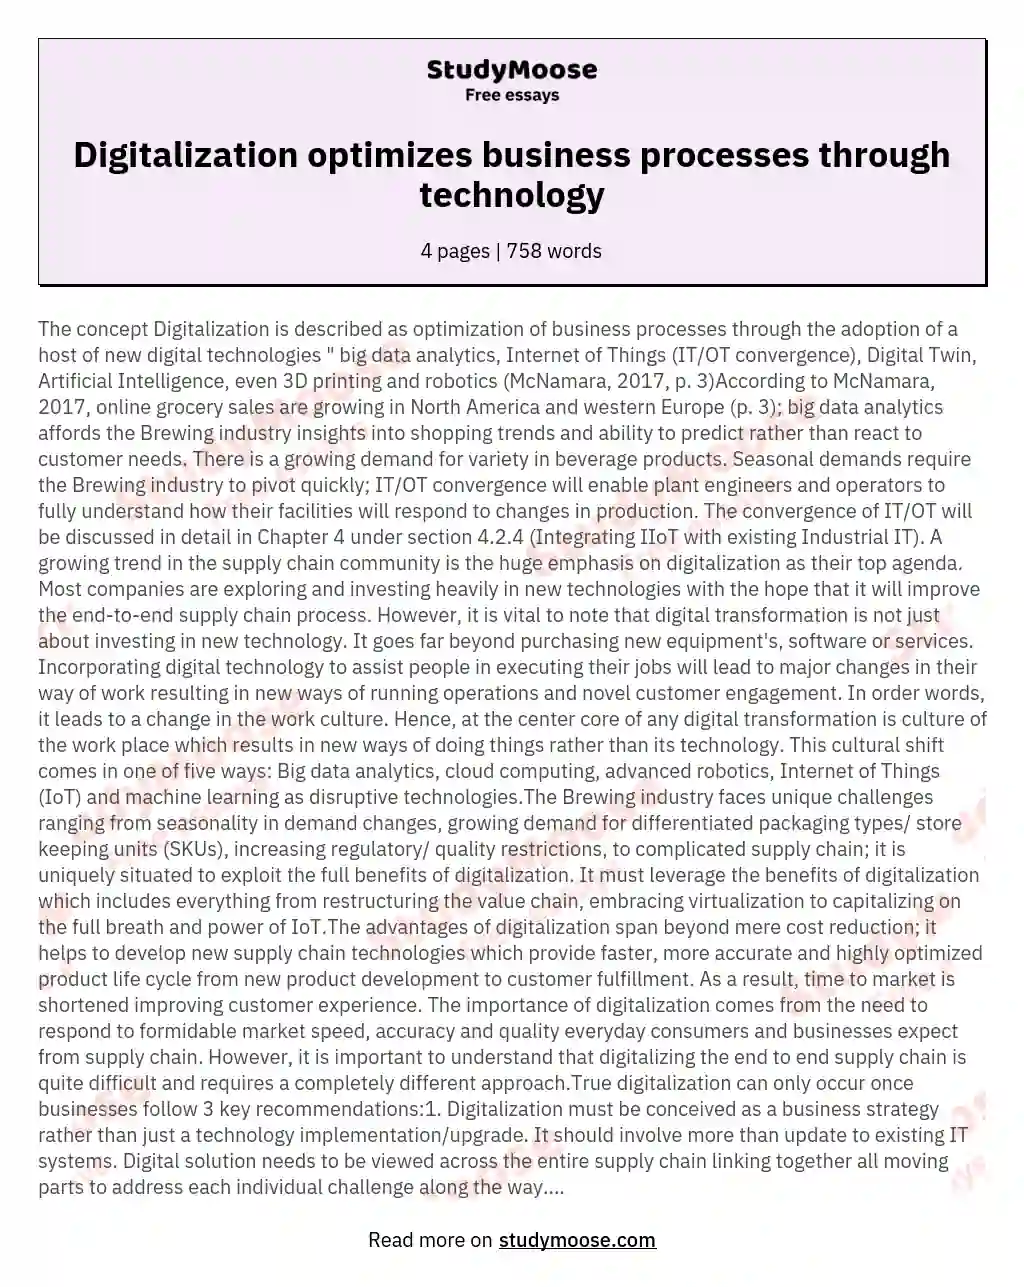 The concept Digitalization is described as optimization of business processes through the